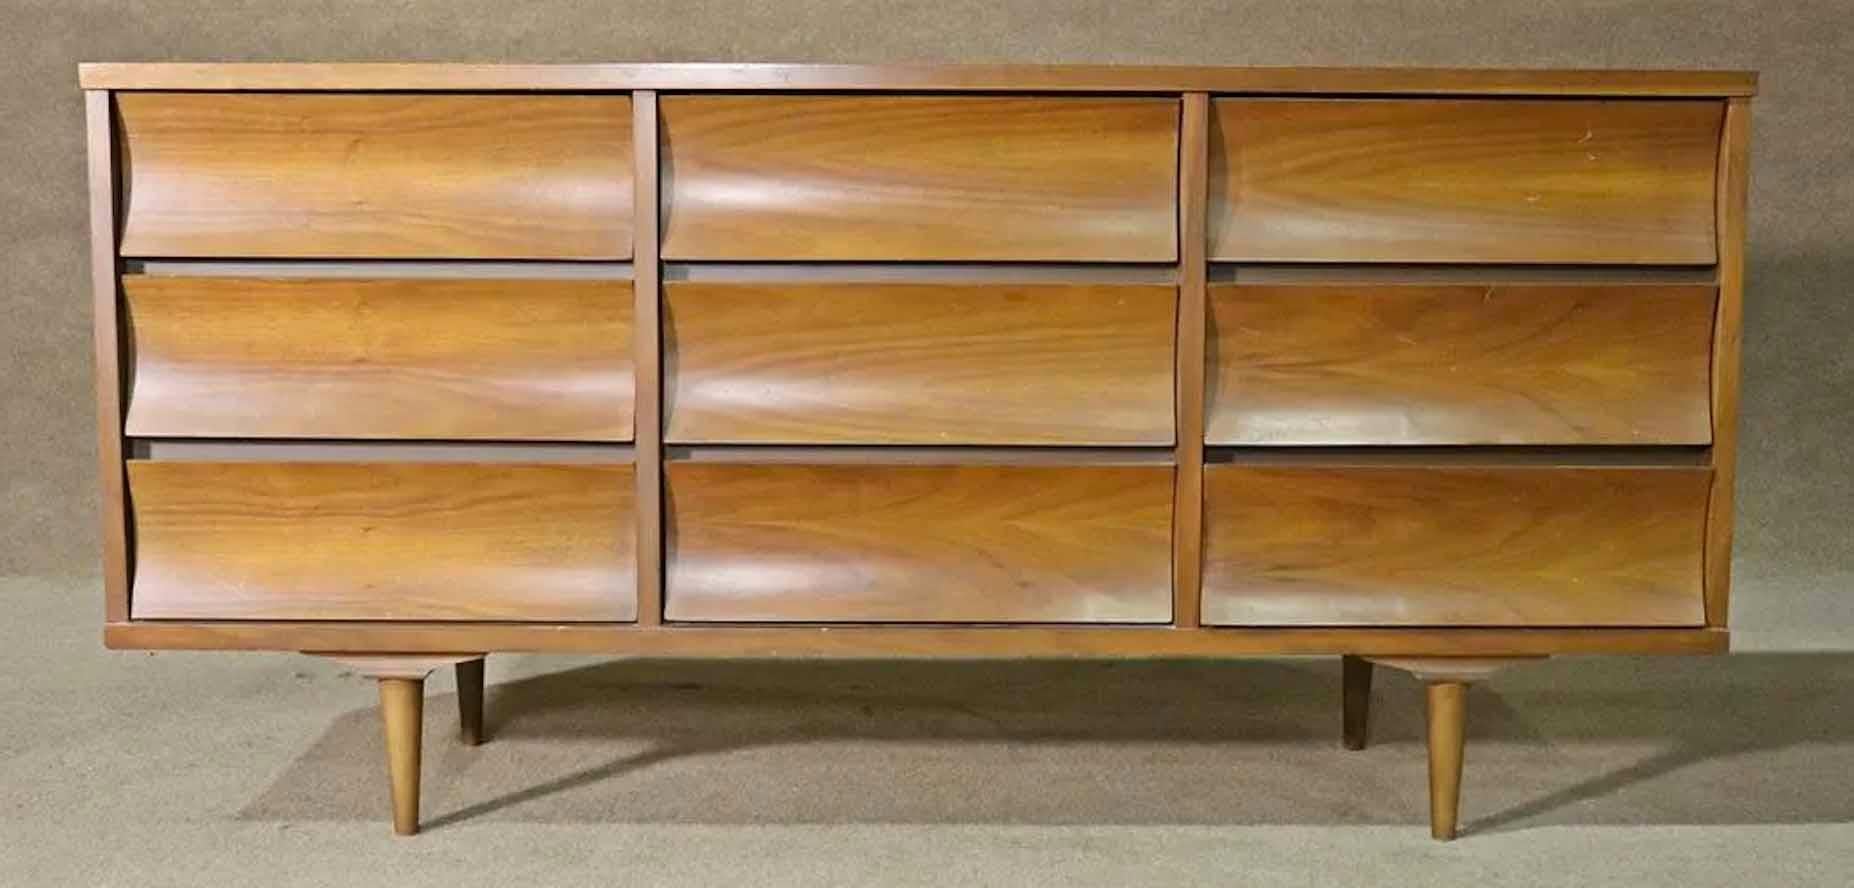 Long mid-century dresser by Johnson Carper for their Brentwood series. Attractive curved drawers and walnut grain. Mirror is not attached and measures 45